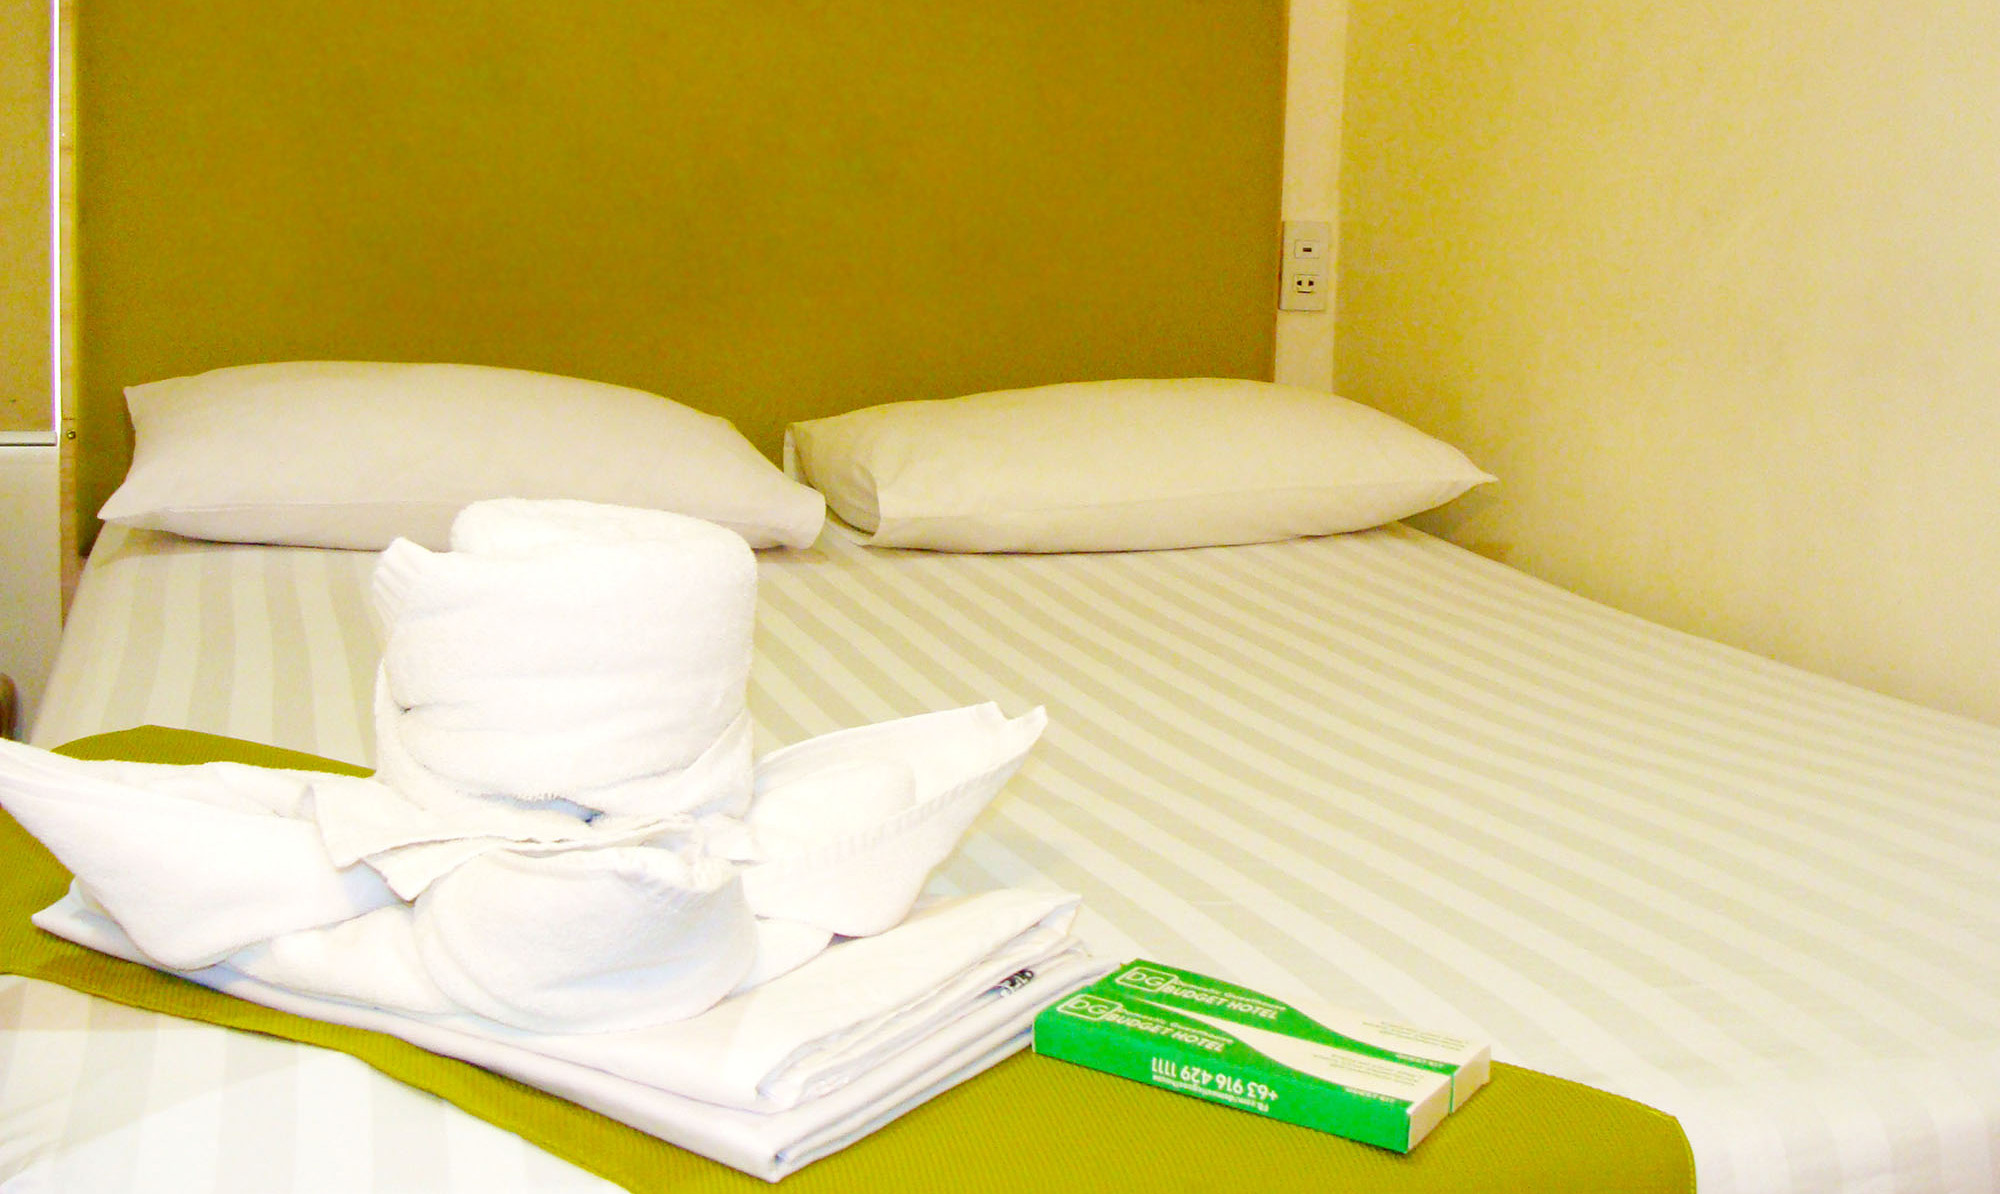 Rooms at DG BUDGET HOTEL